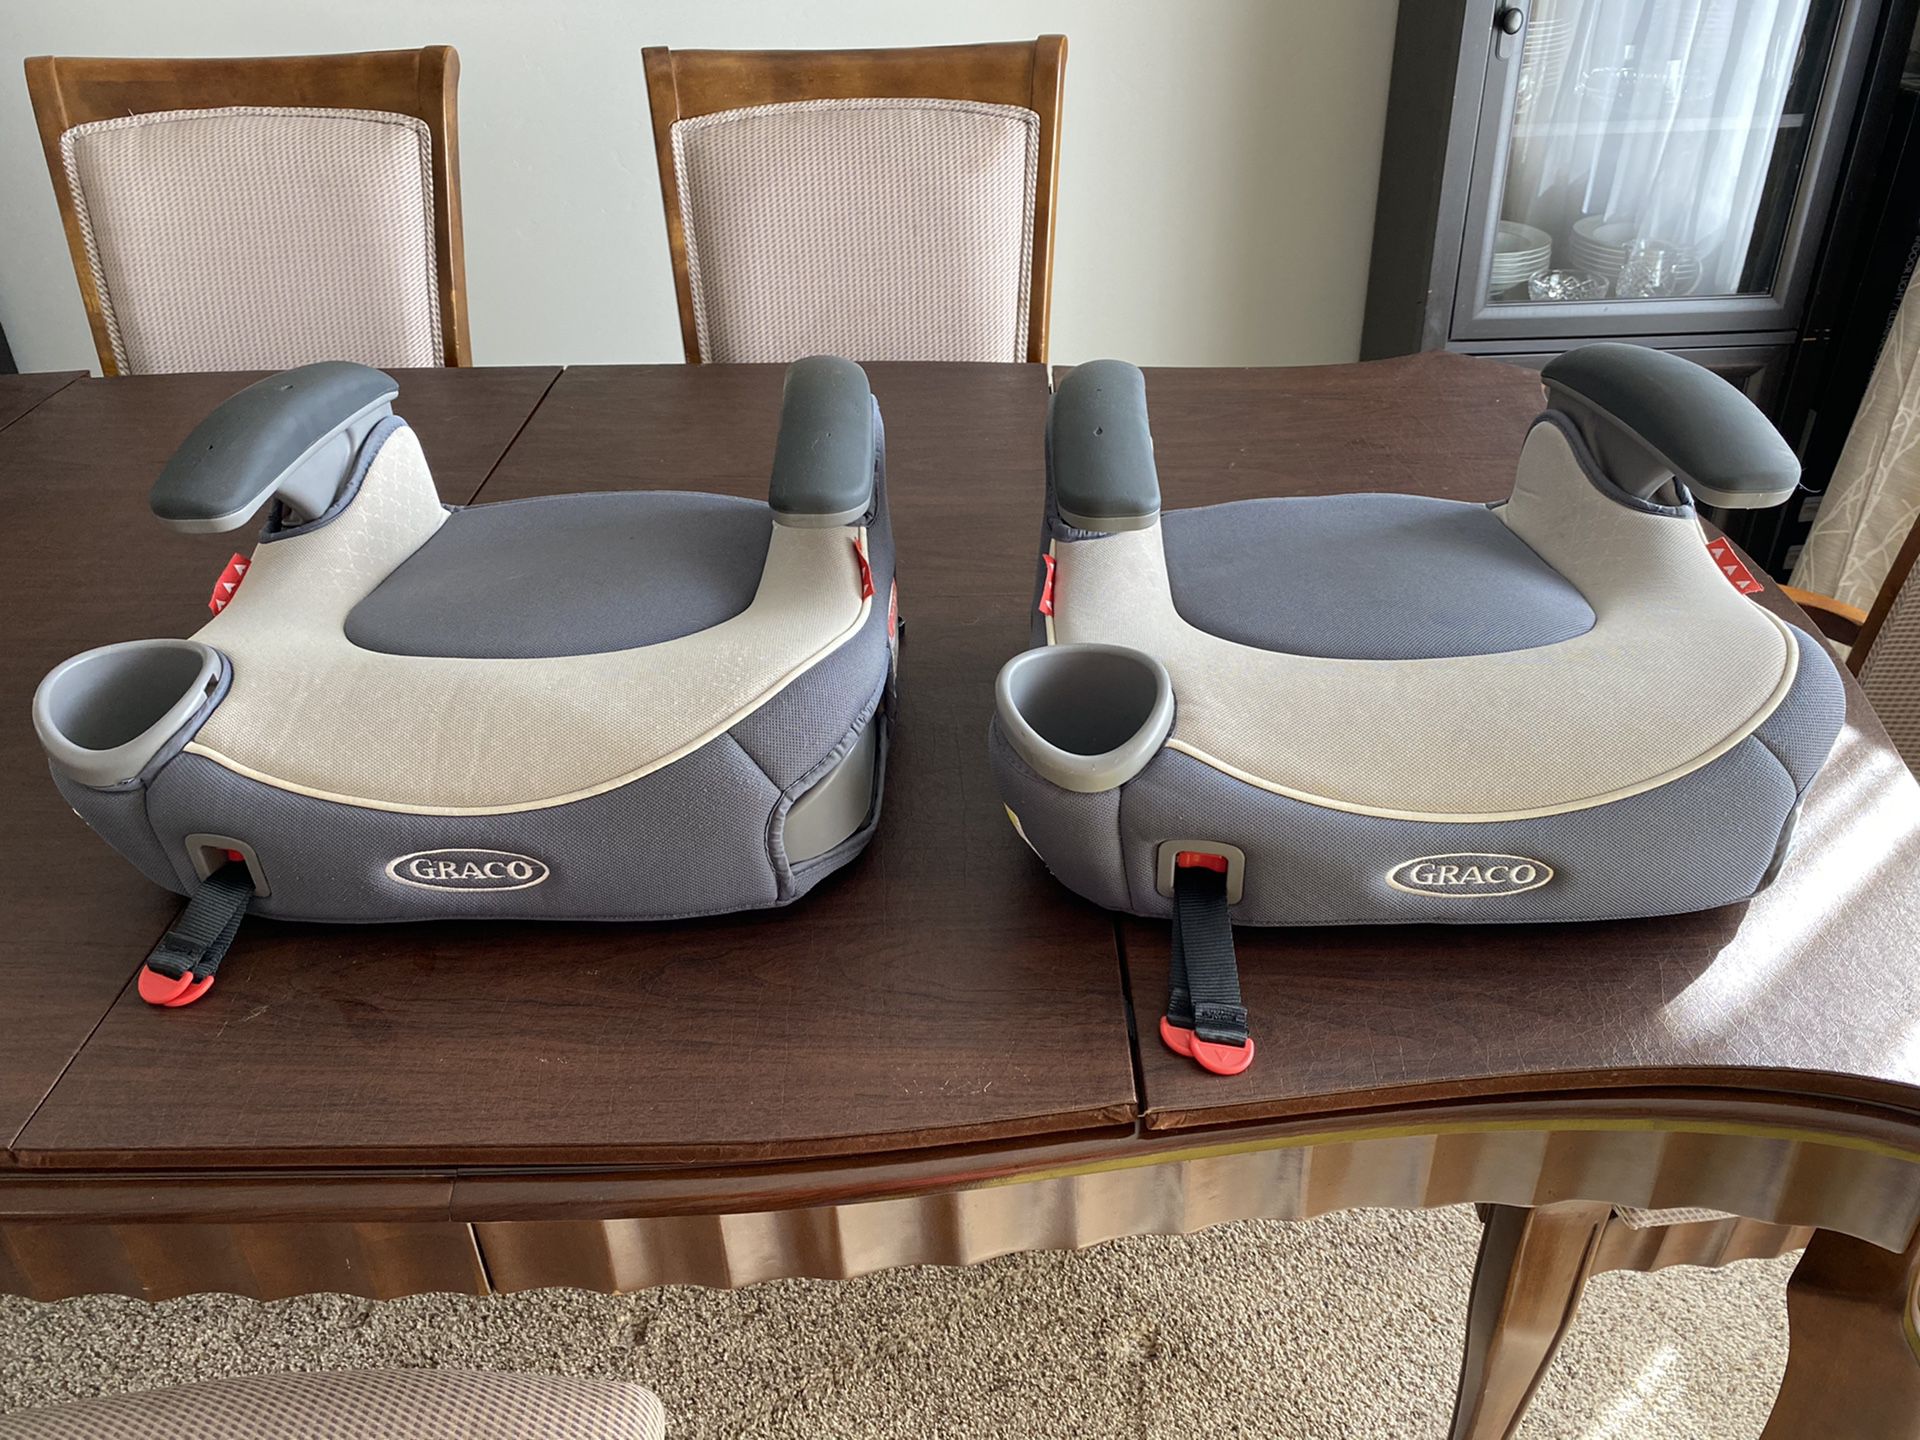 2 Graco AFFIX Booster Seats with cup holders